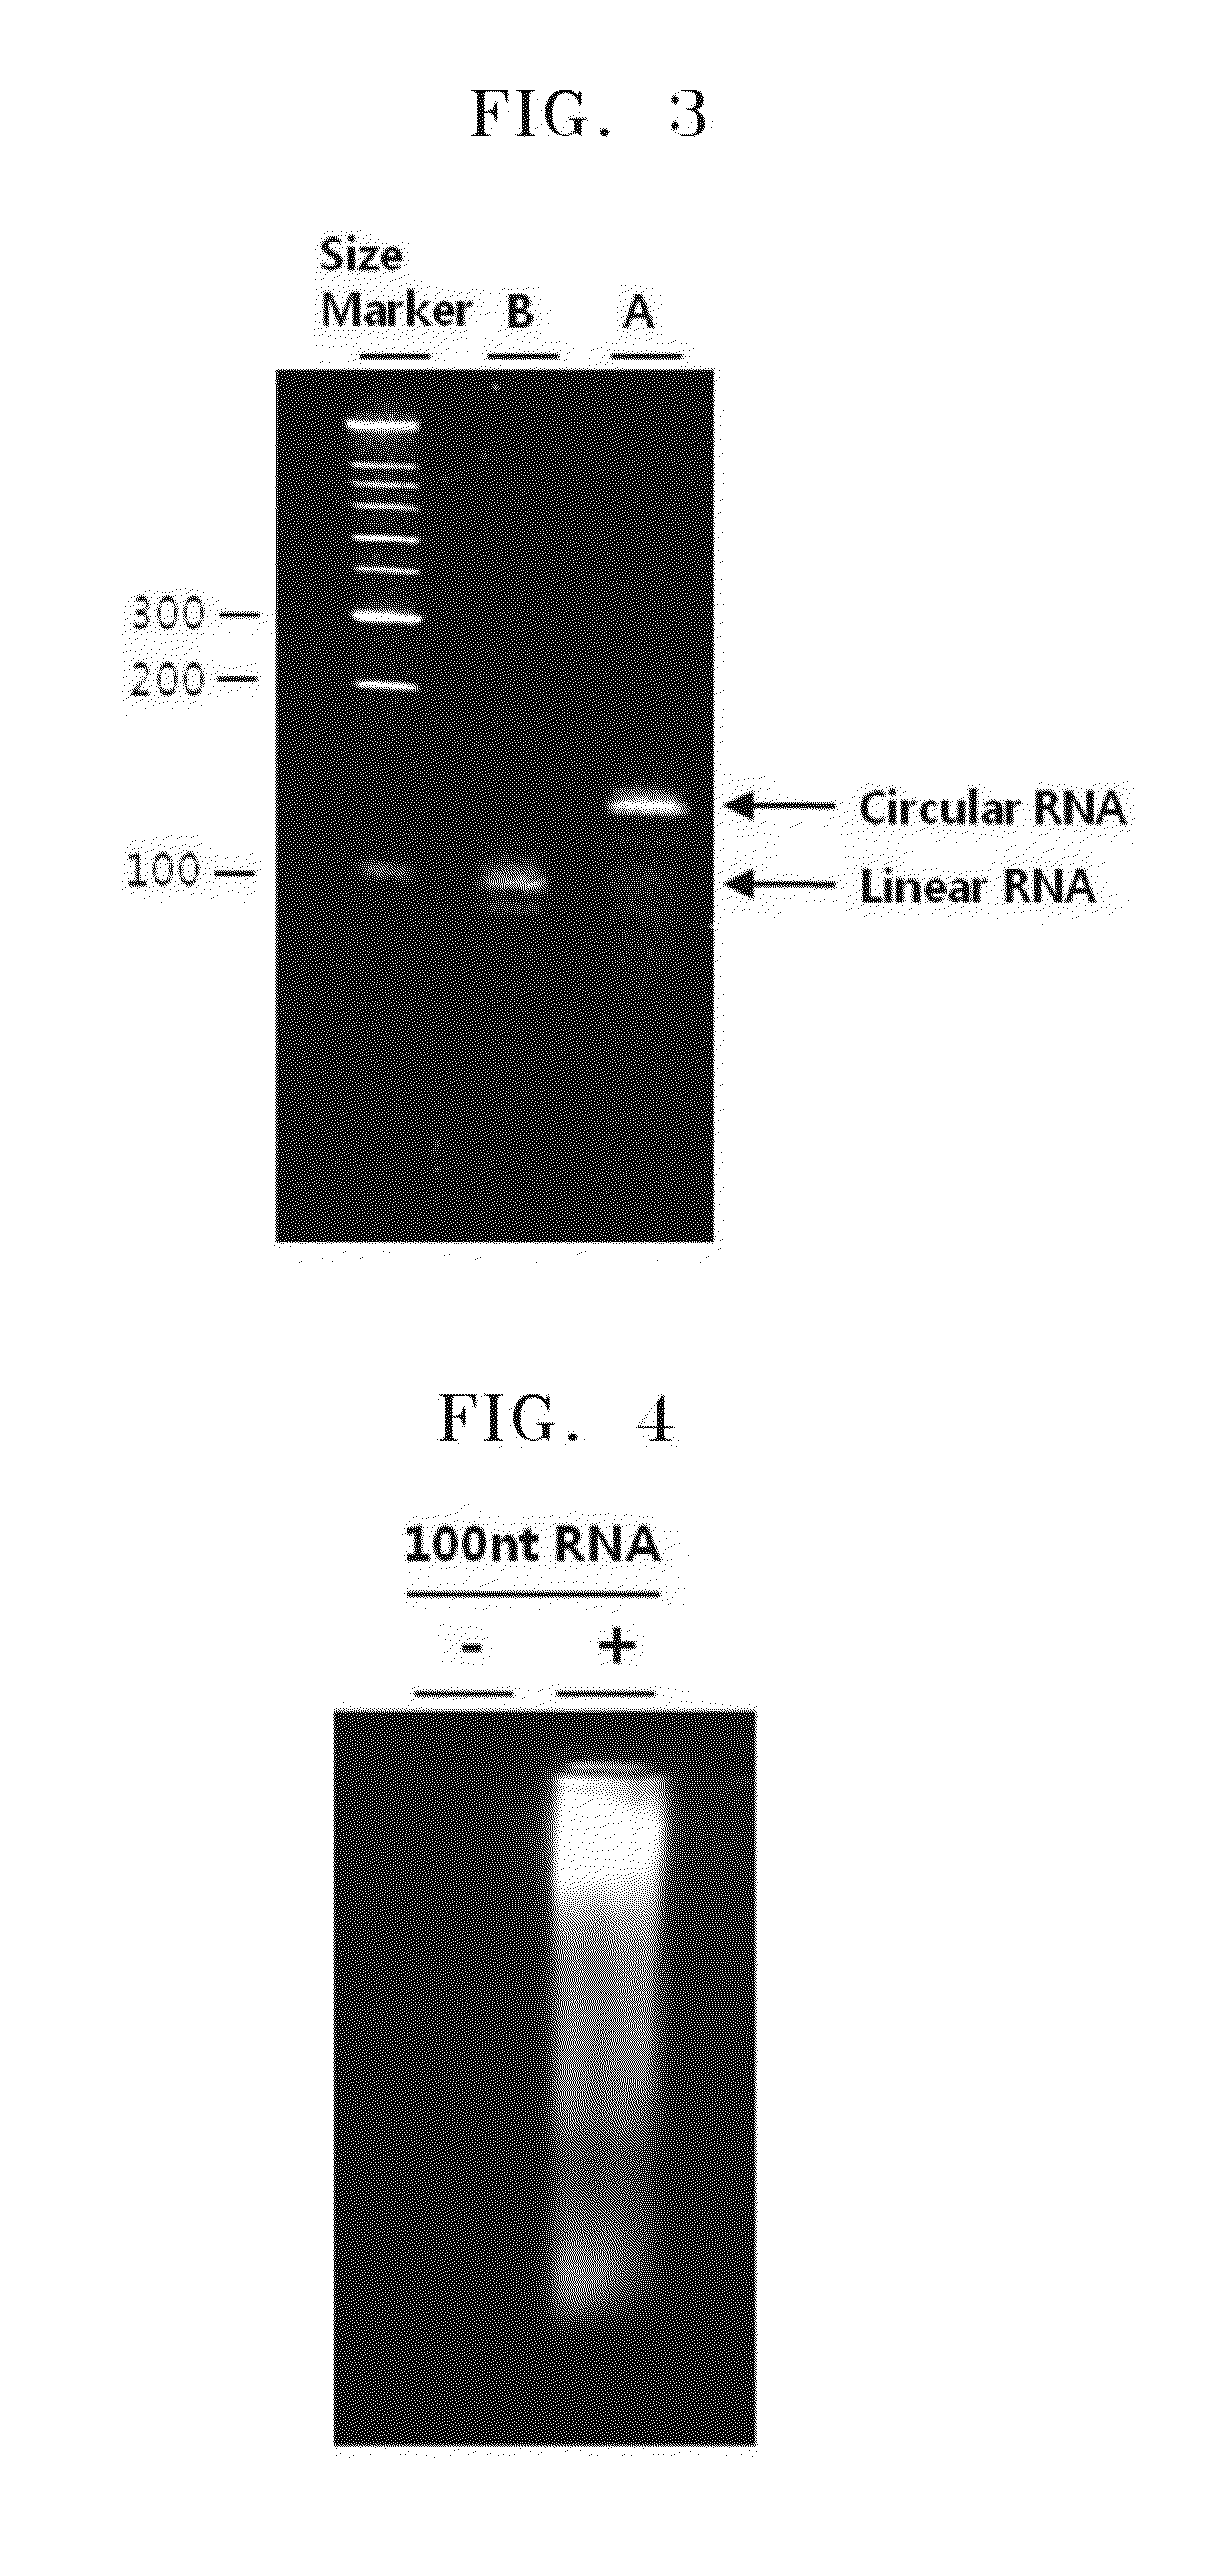 Method of determining a ratio of RNA species in a sample